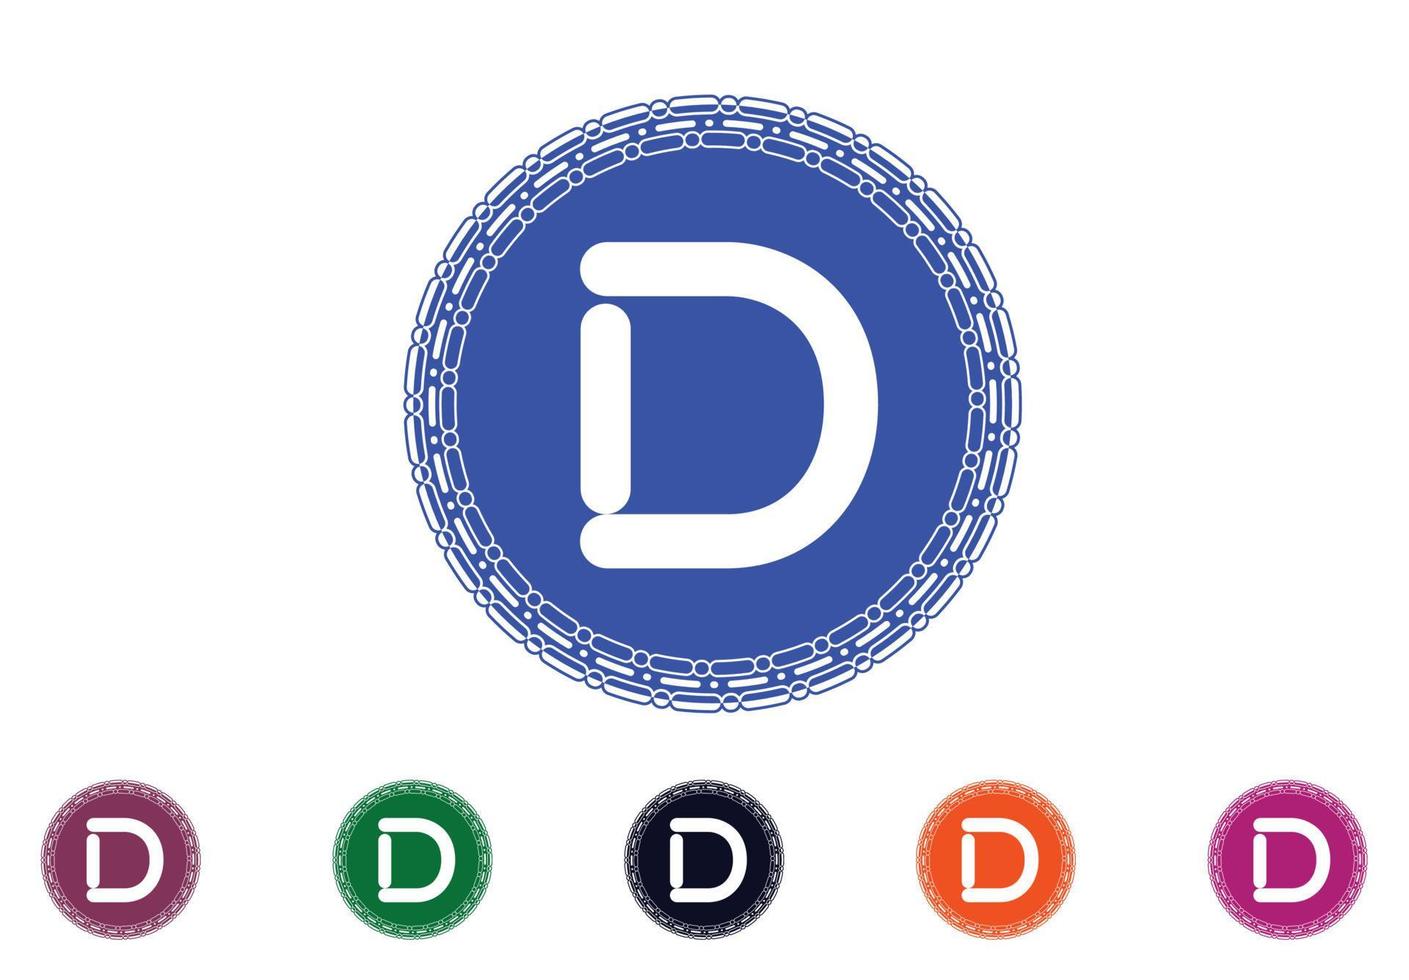 D letter logo and icon design template vector